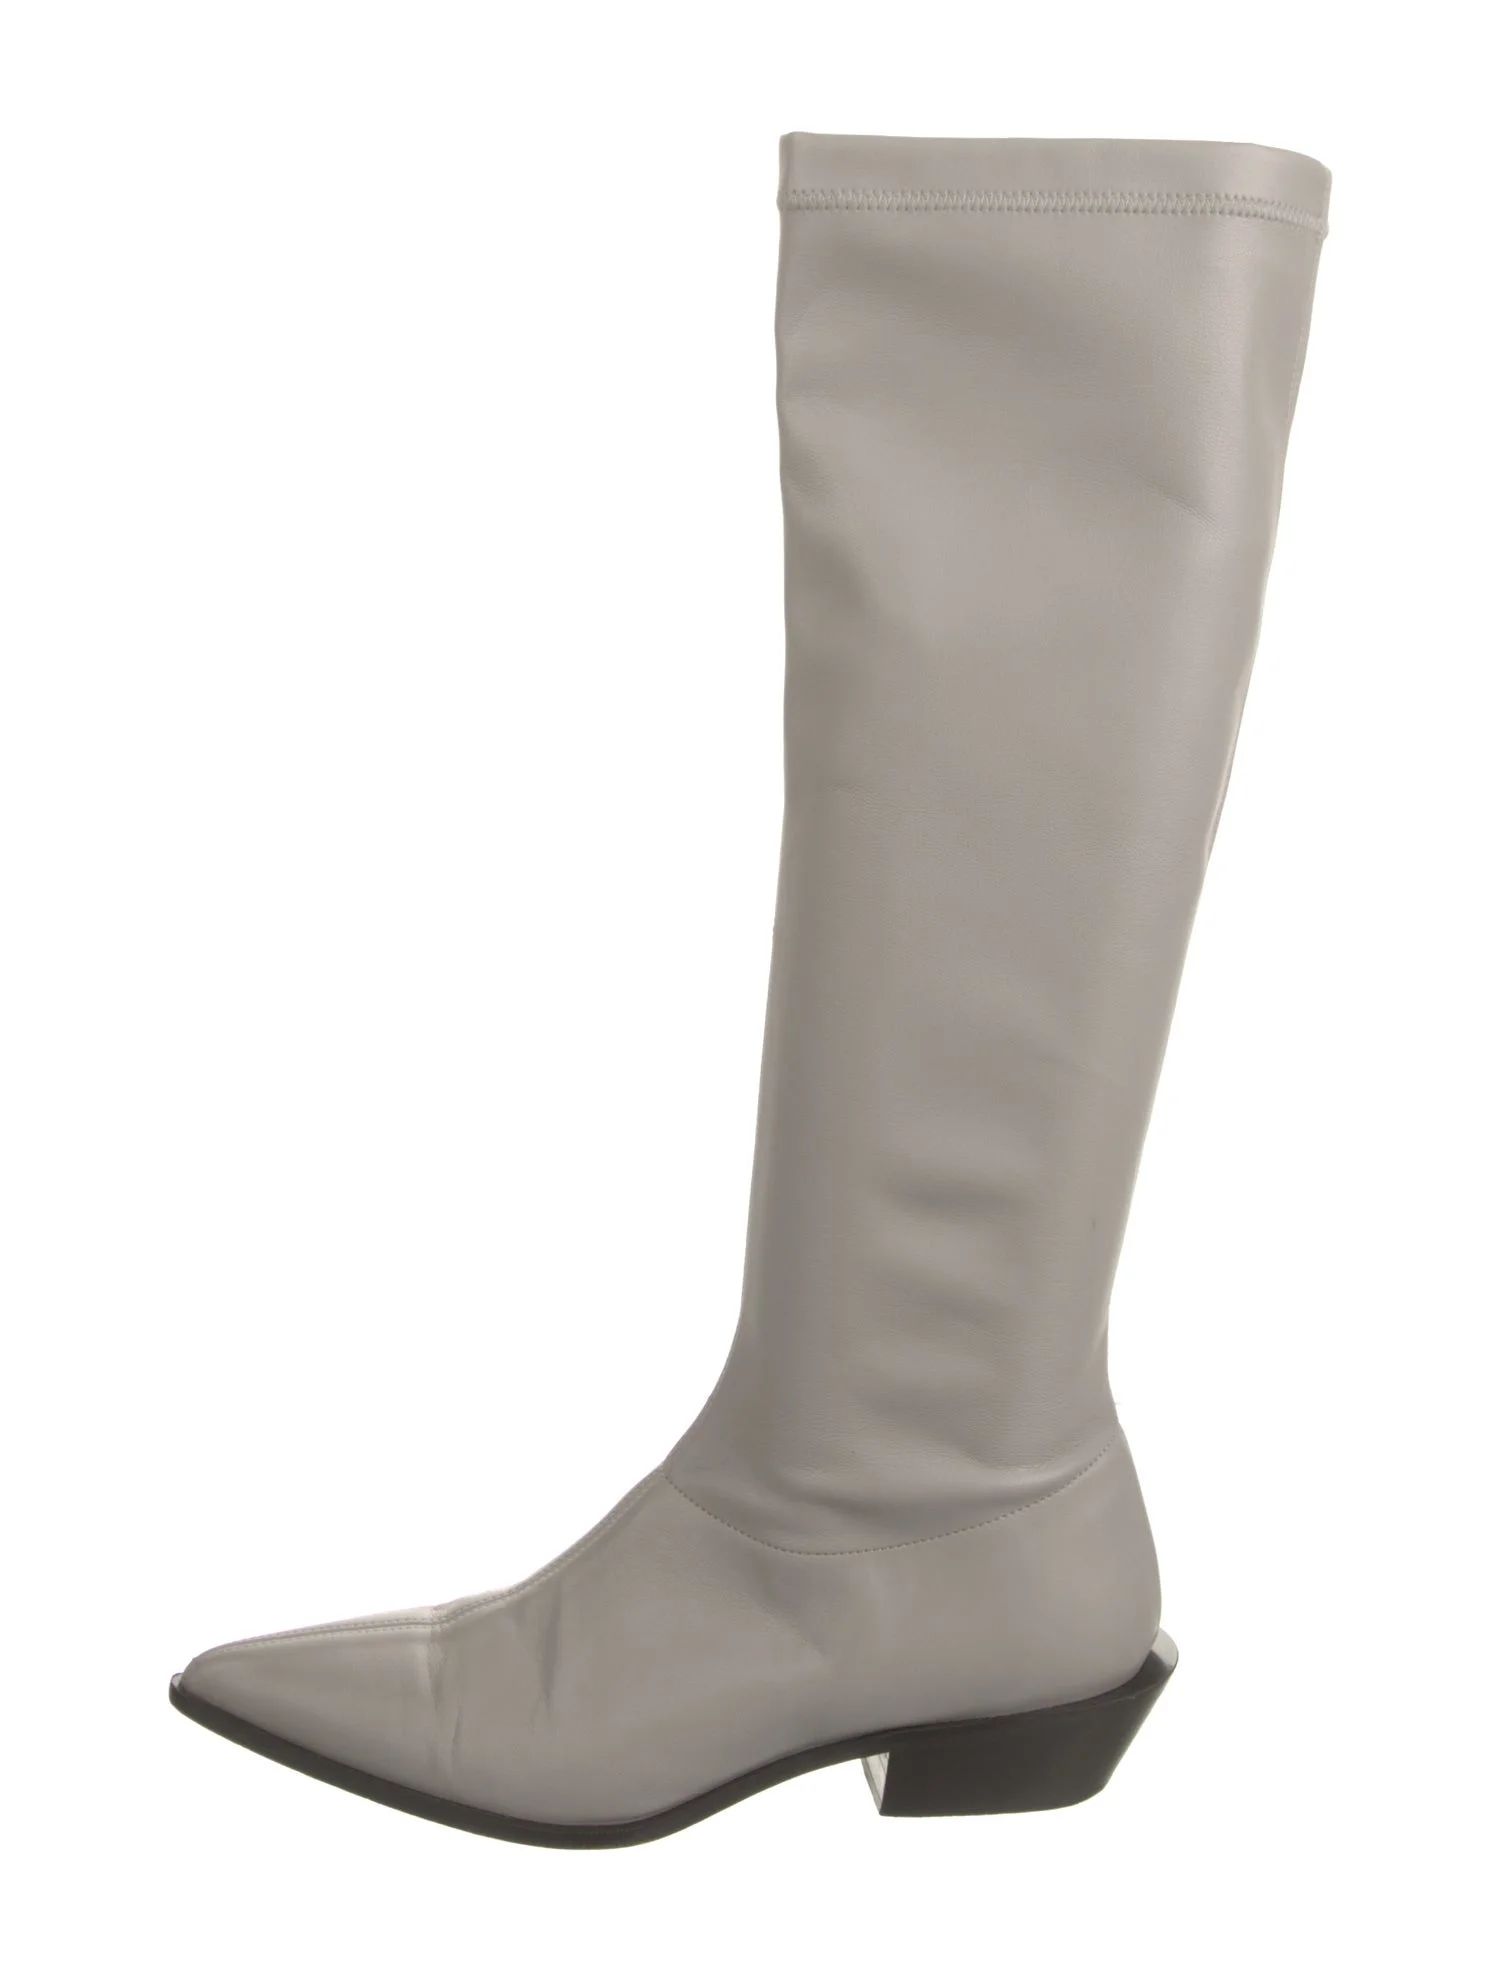 Tibi Leather Knee-High Riding Boots | The RealReal